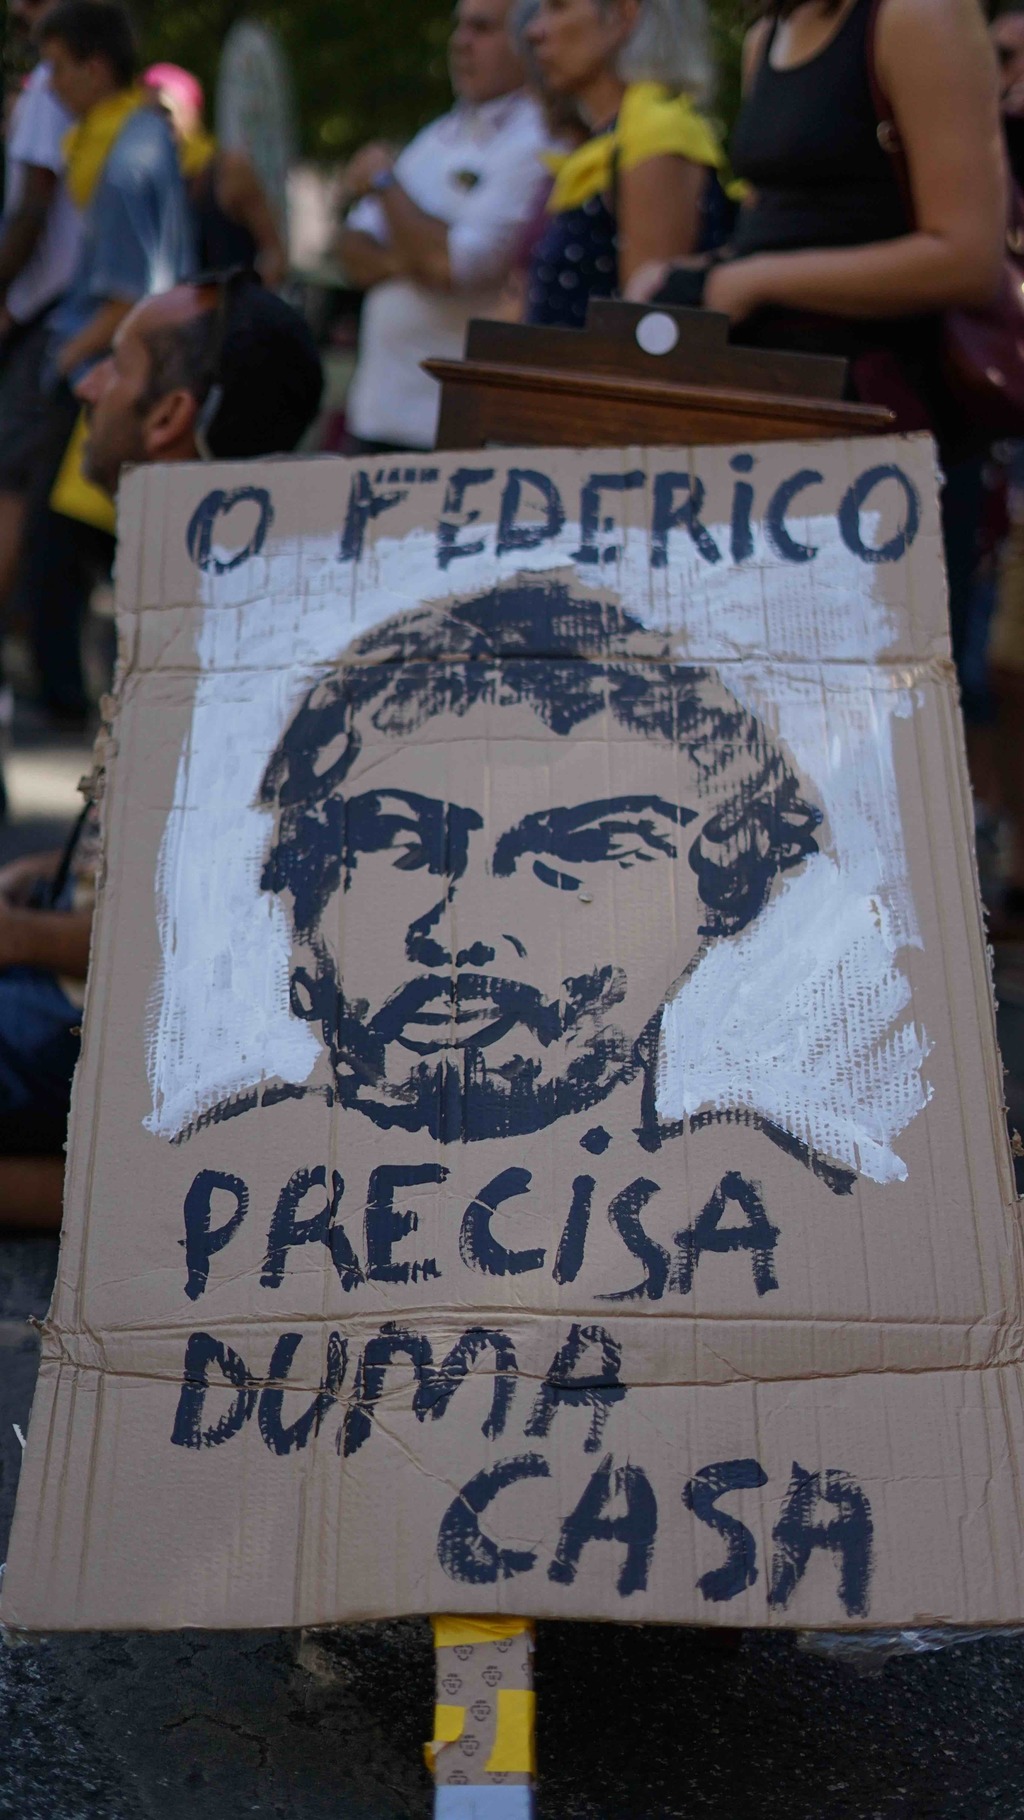 In Portugal, protestors are fighting for housing rights -